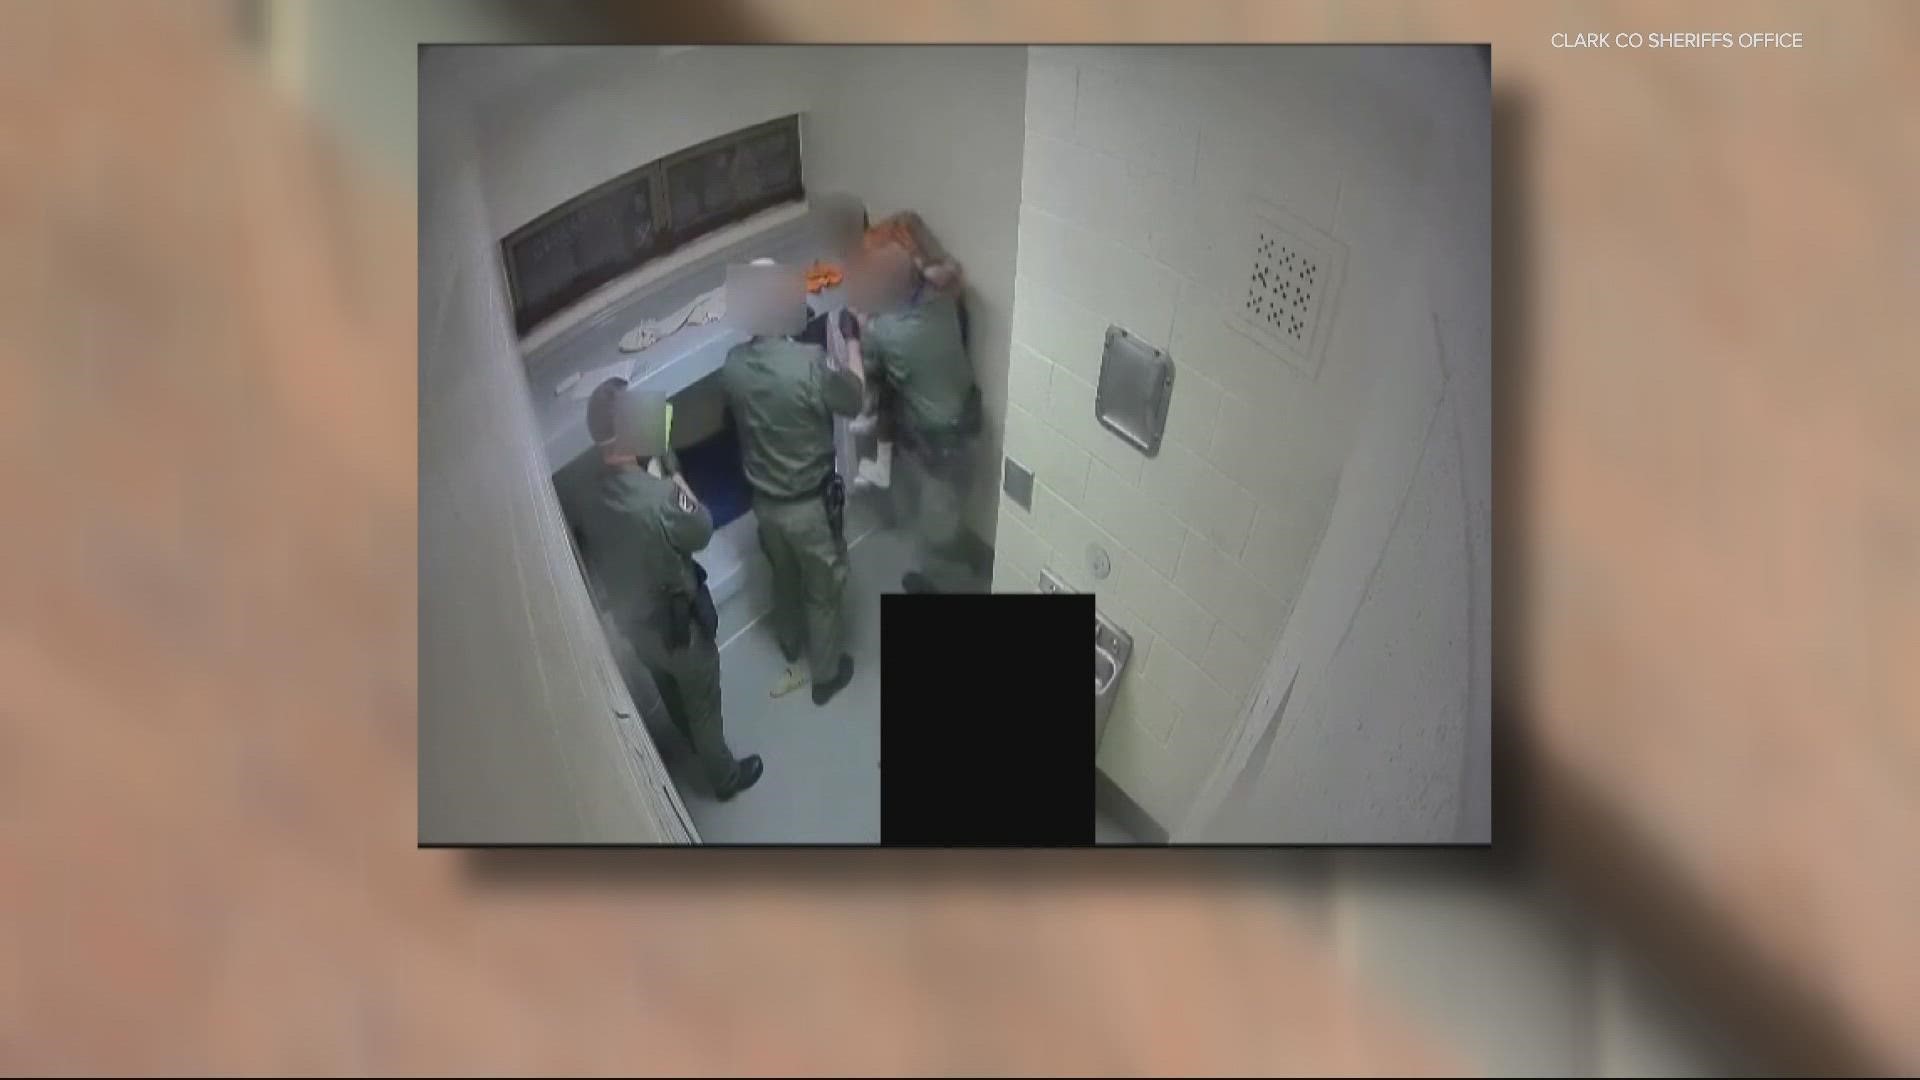 The incident occurred last year when corrections deputies restrained an inmate during a search of his cell. The incident is under investigation.